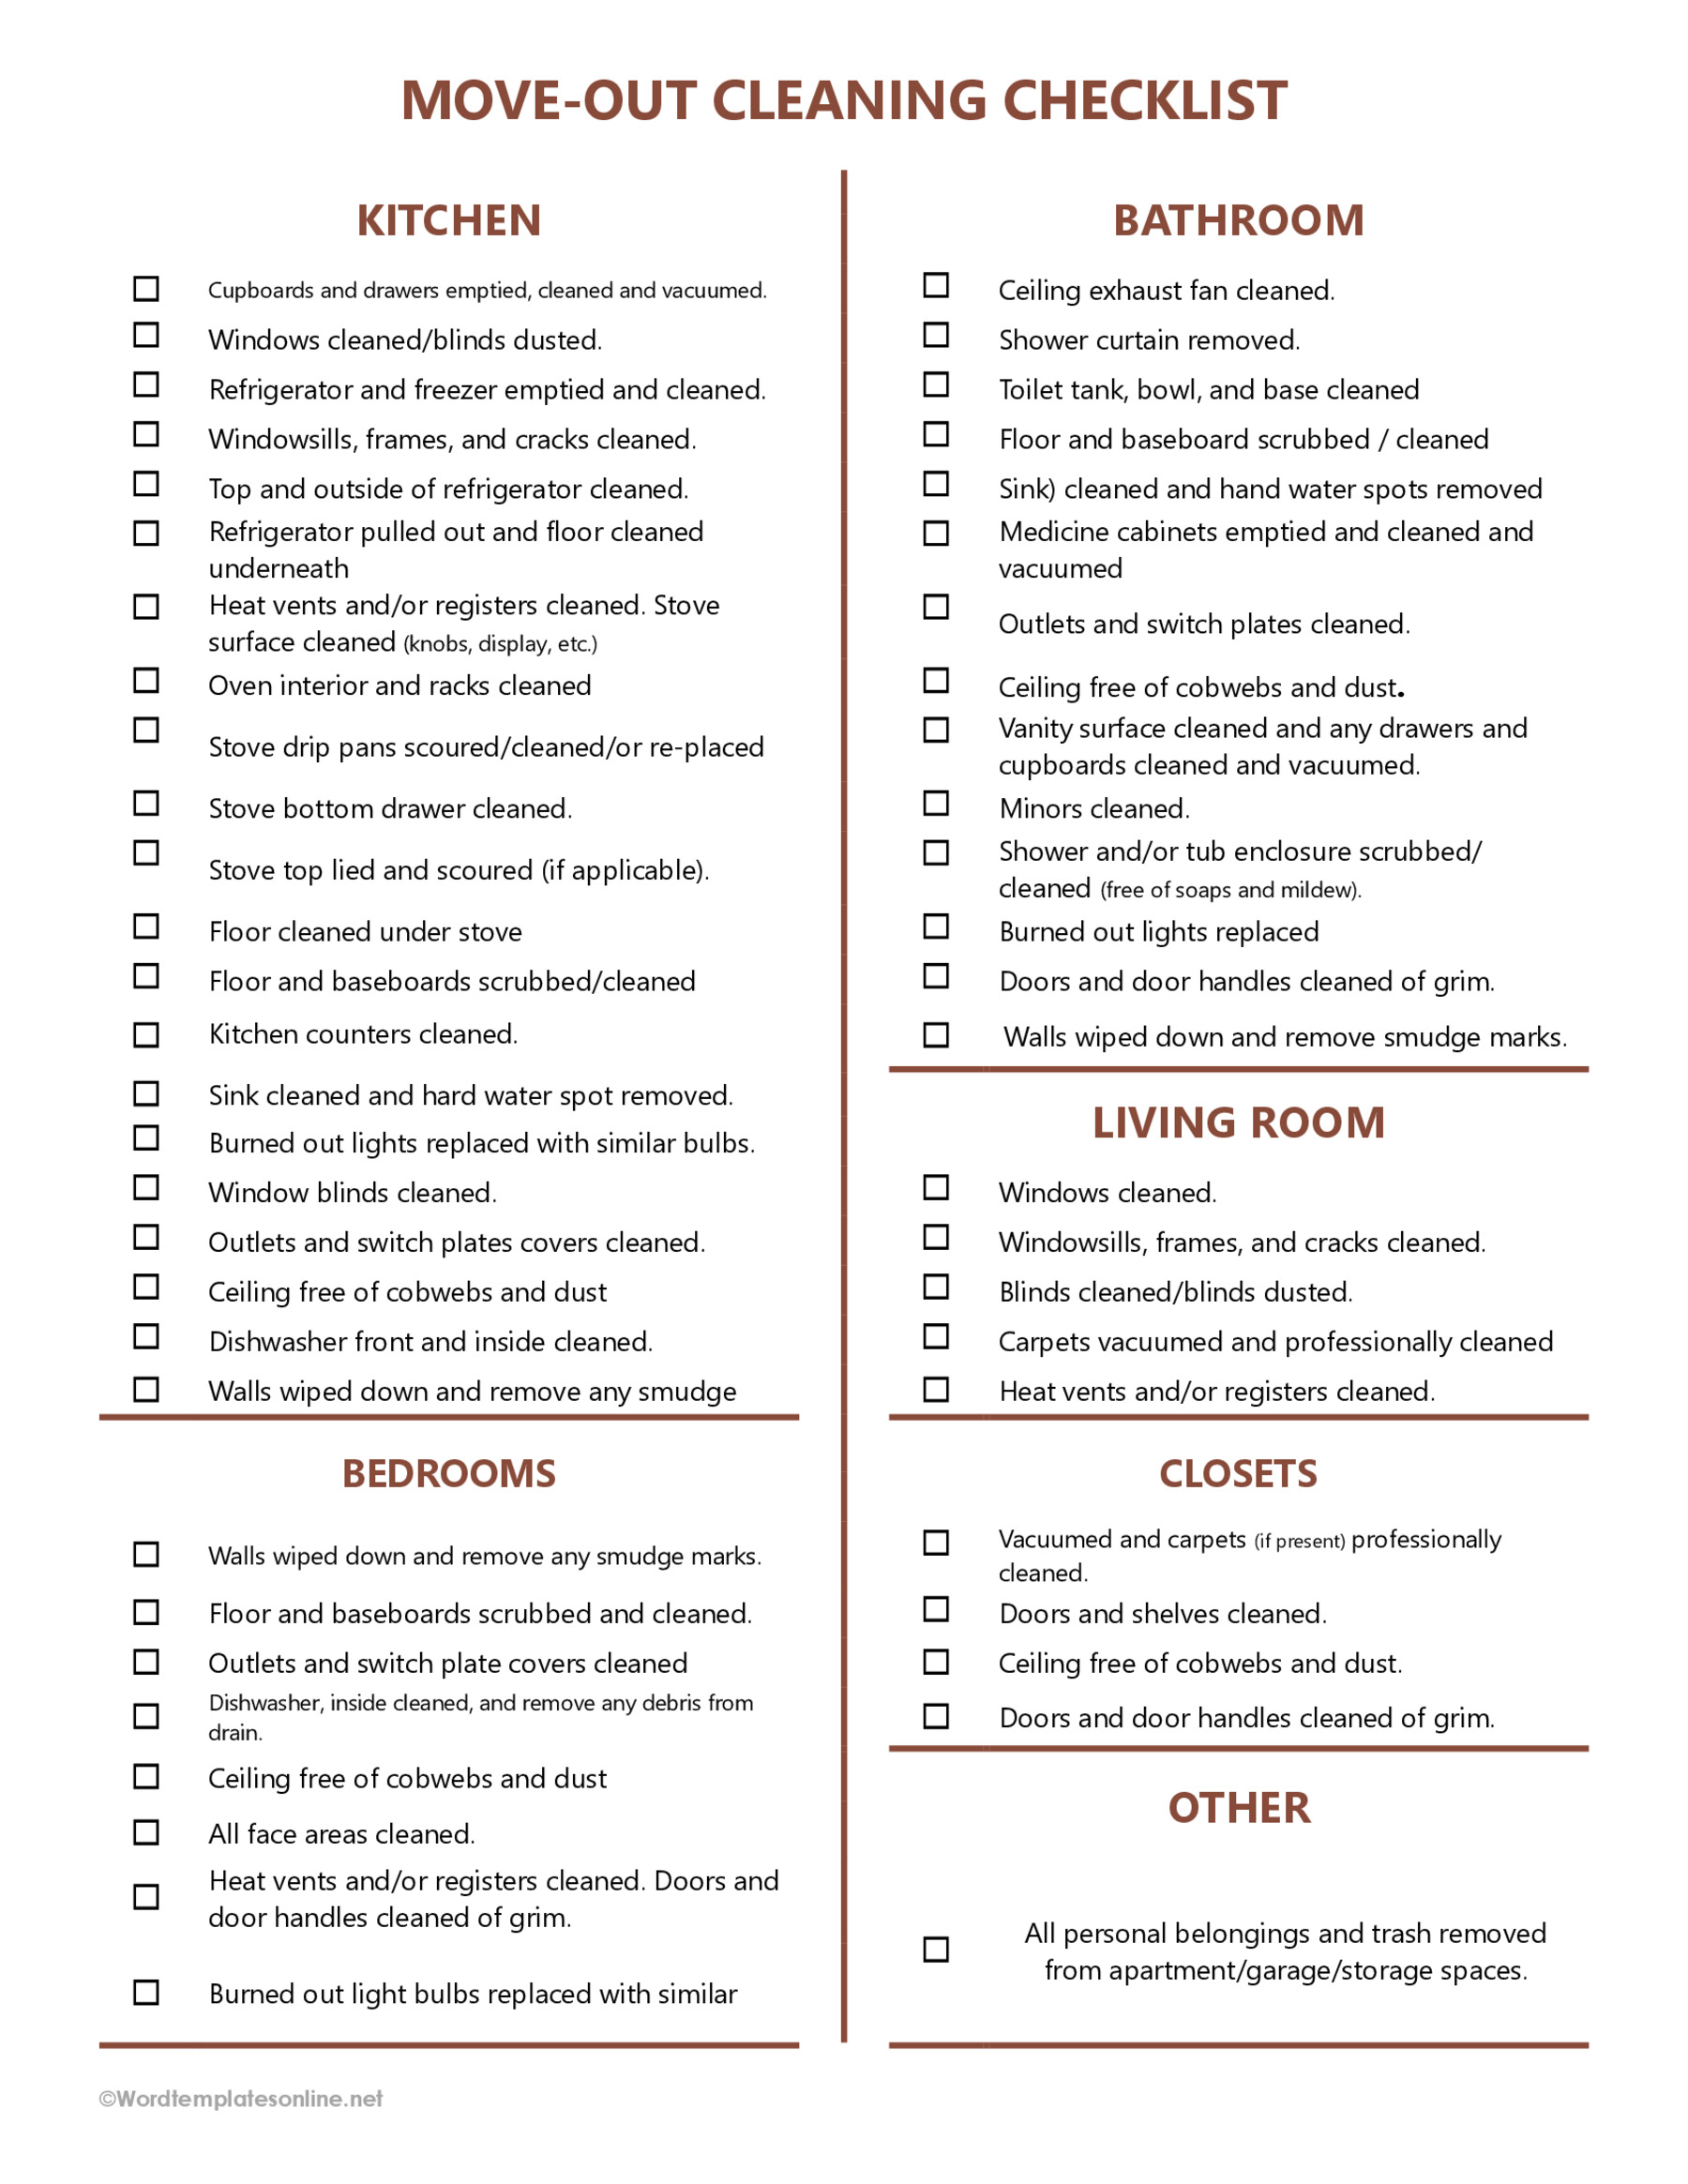 Sample Move Out Cleaning Checklist Format